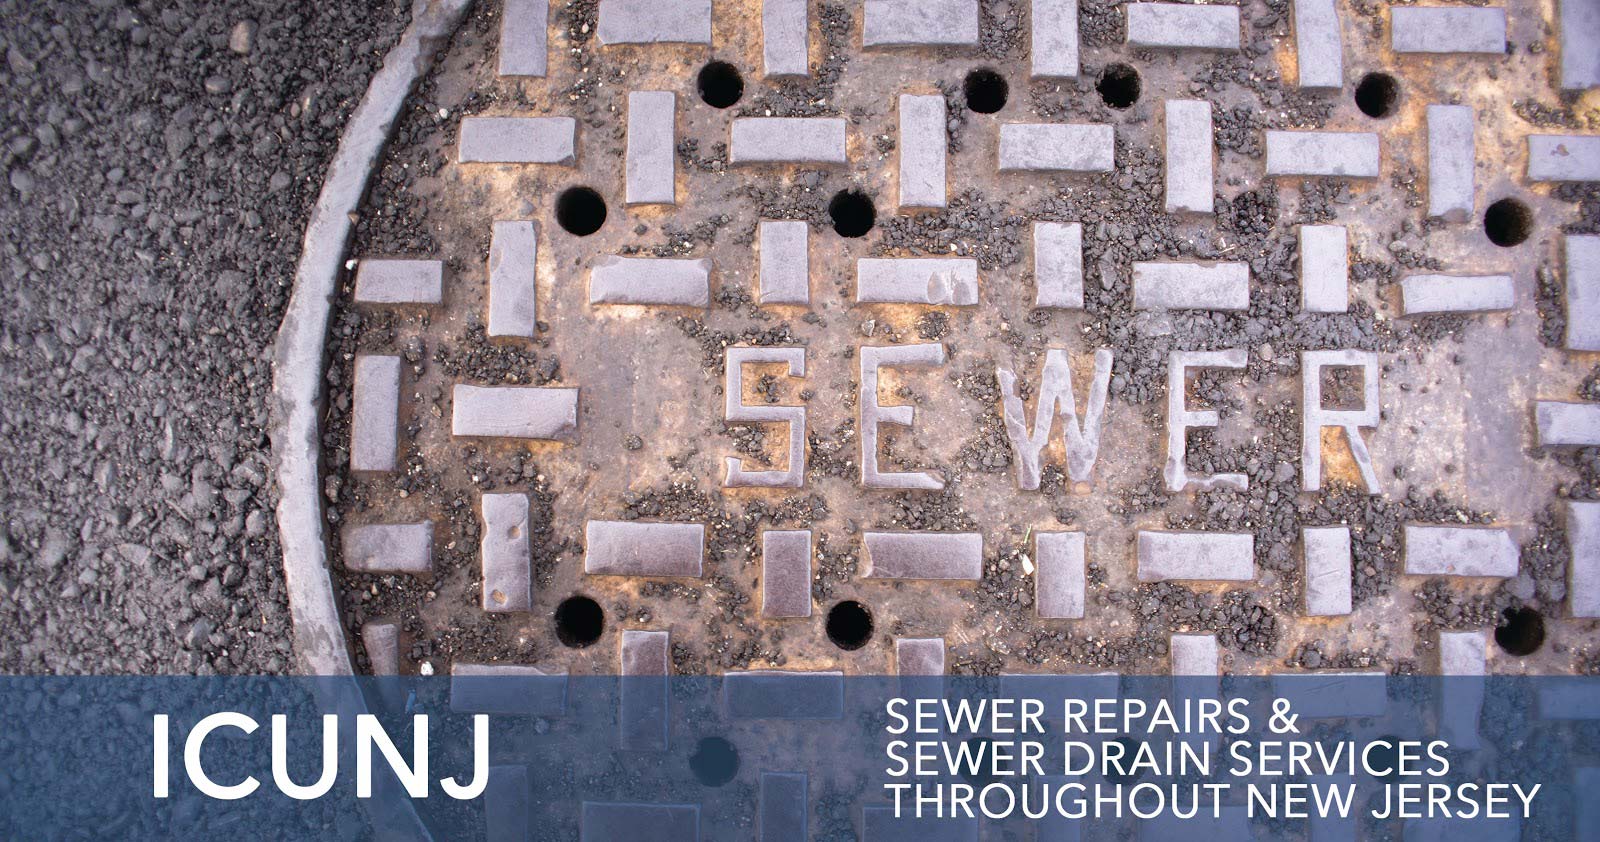 ICUNJ: Providing Sewer Repair and Sewer Drain Services Throughout New Jersey